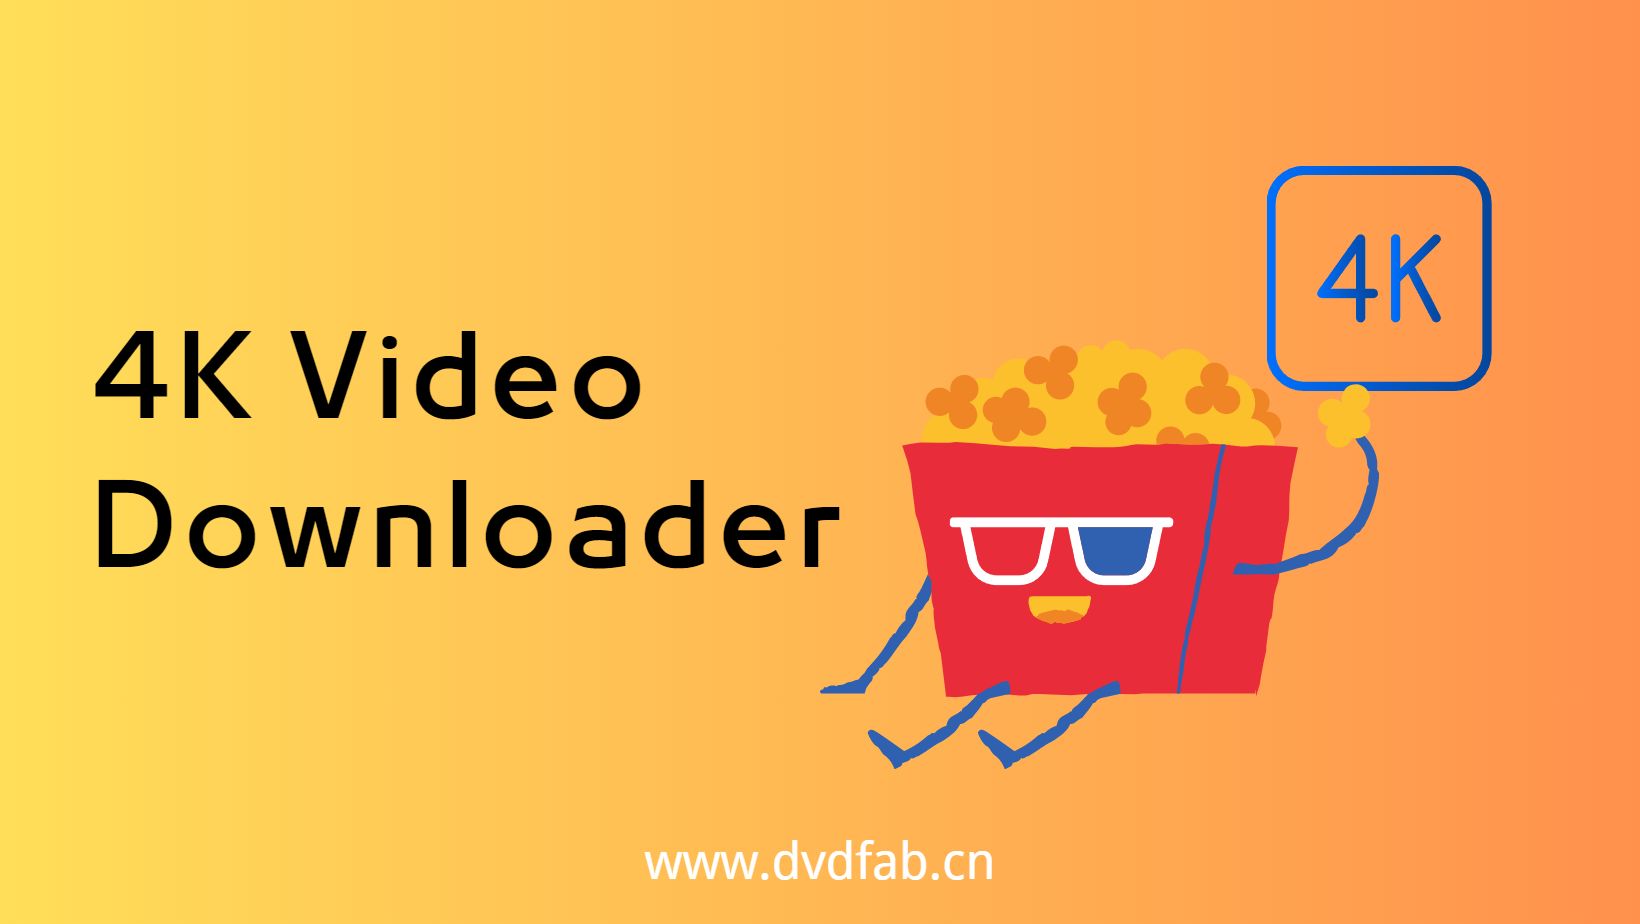 what is the best 4k video downloader